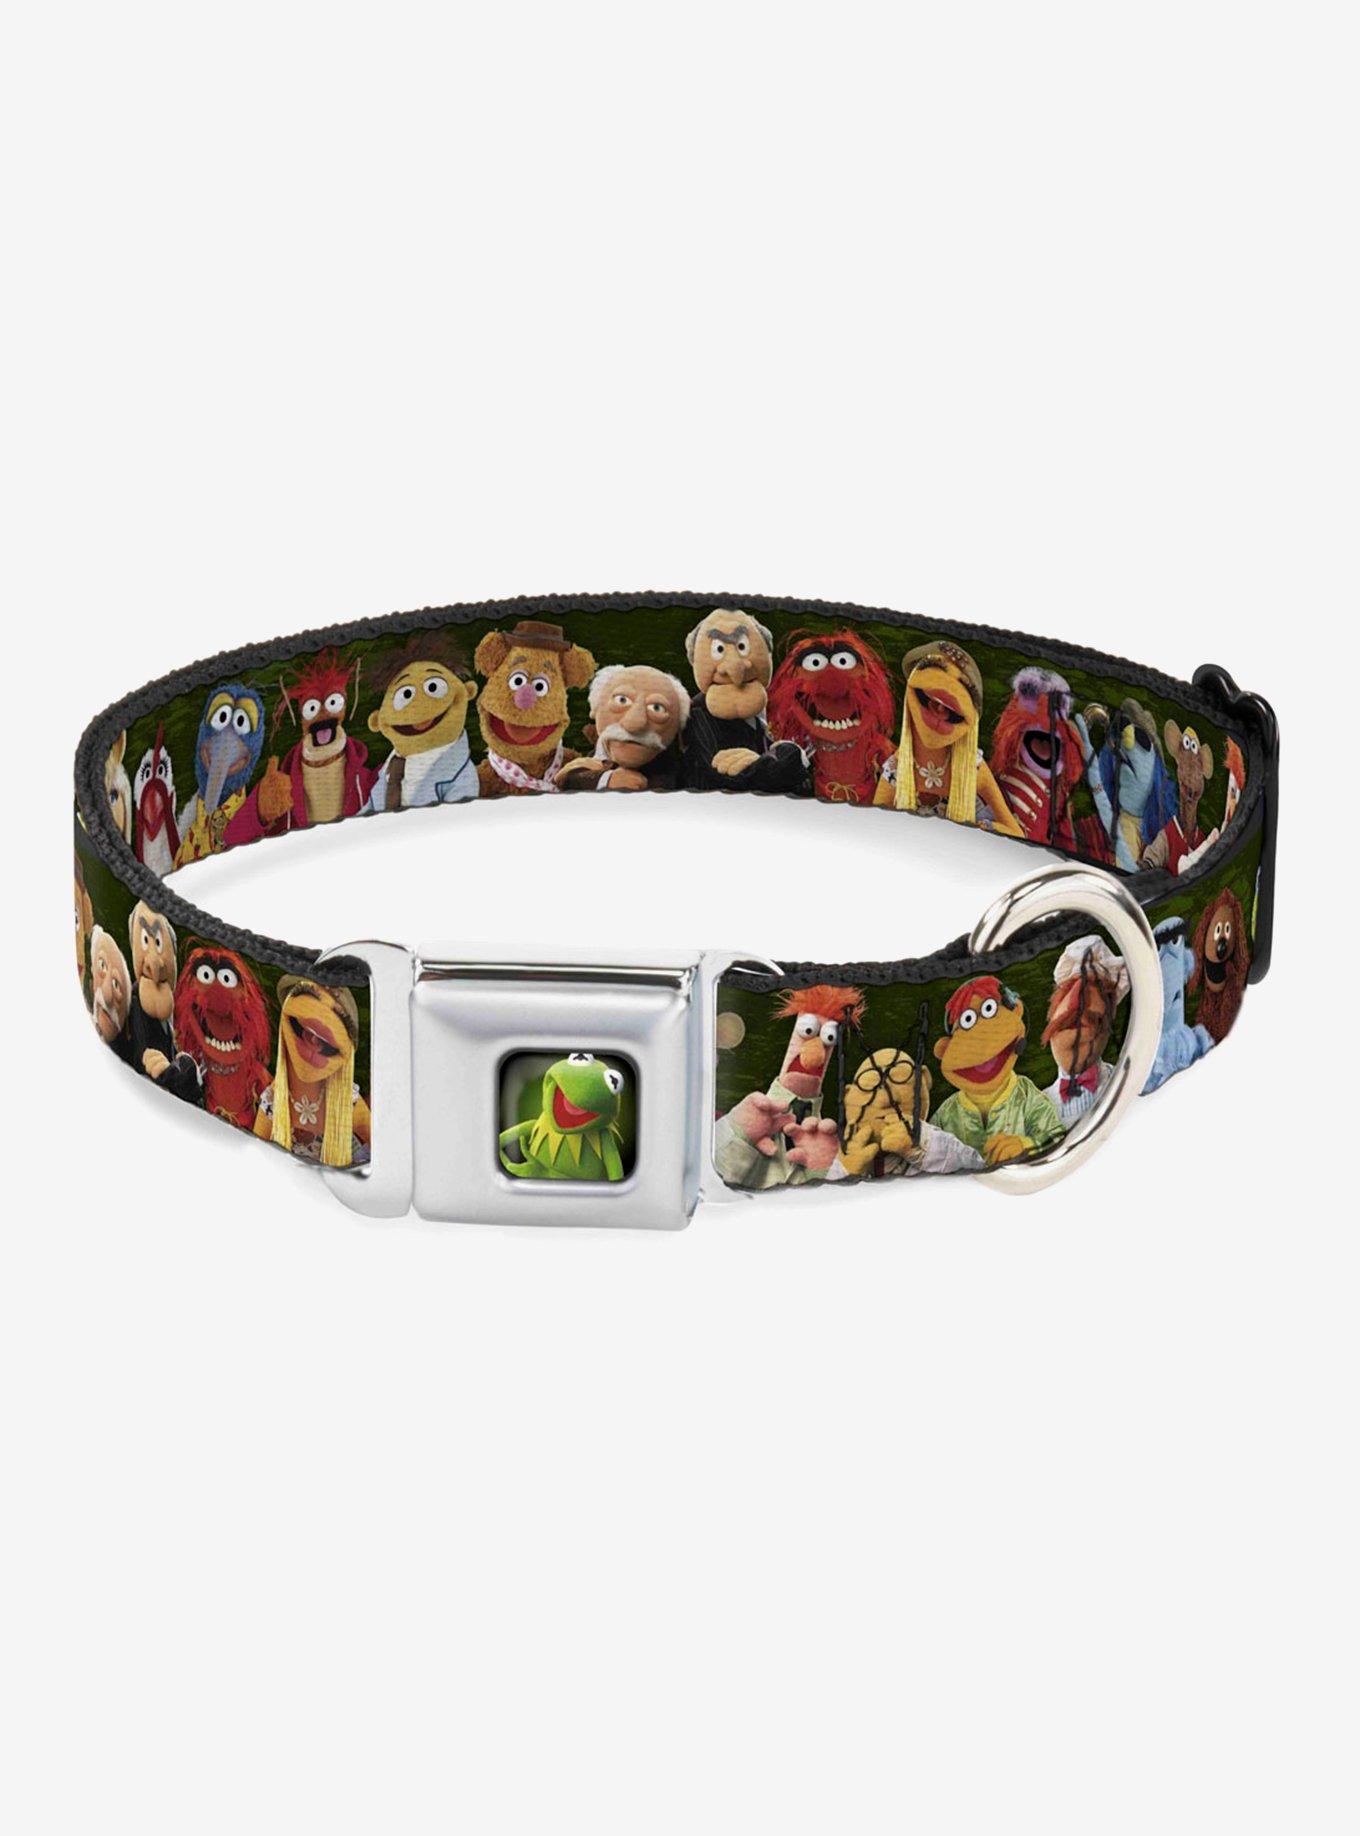 Disney The Muppets Character Group Pose Seatbelt Buckle Dog Collar, GREEN, hi-res